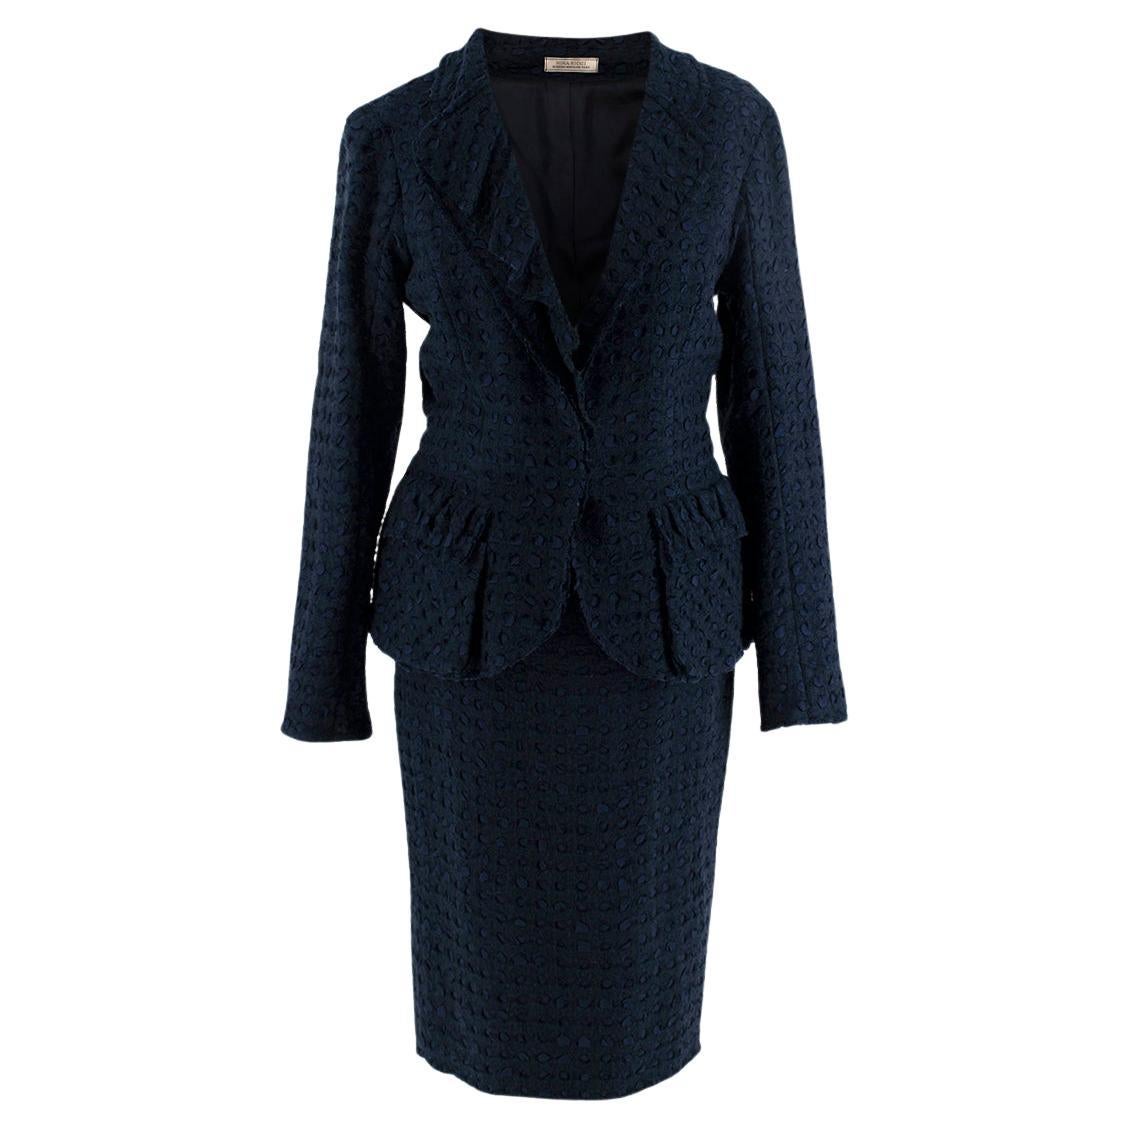 Nina Ricci Navy Blue Textured Boucle Wool & Ribbon Skirt Suit Set - US 6 For Sale